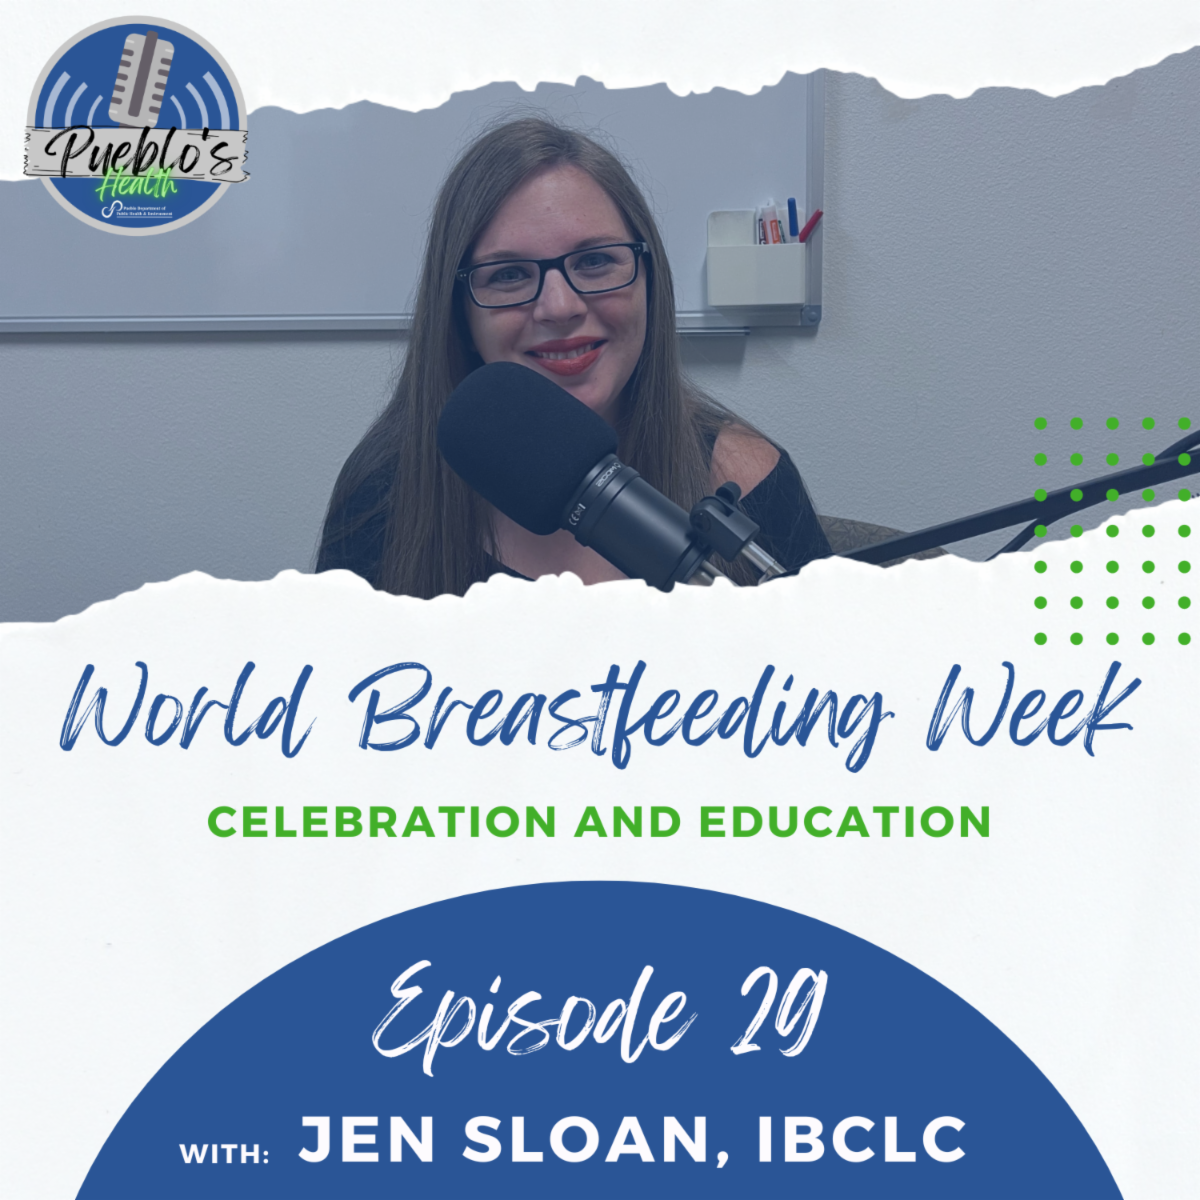 Pueblo Health Podcast - World Breastfeeding Week Celebration and Education. Episode 29 With: Jen Sloan, IBCLC